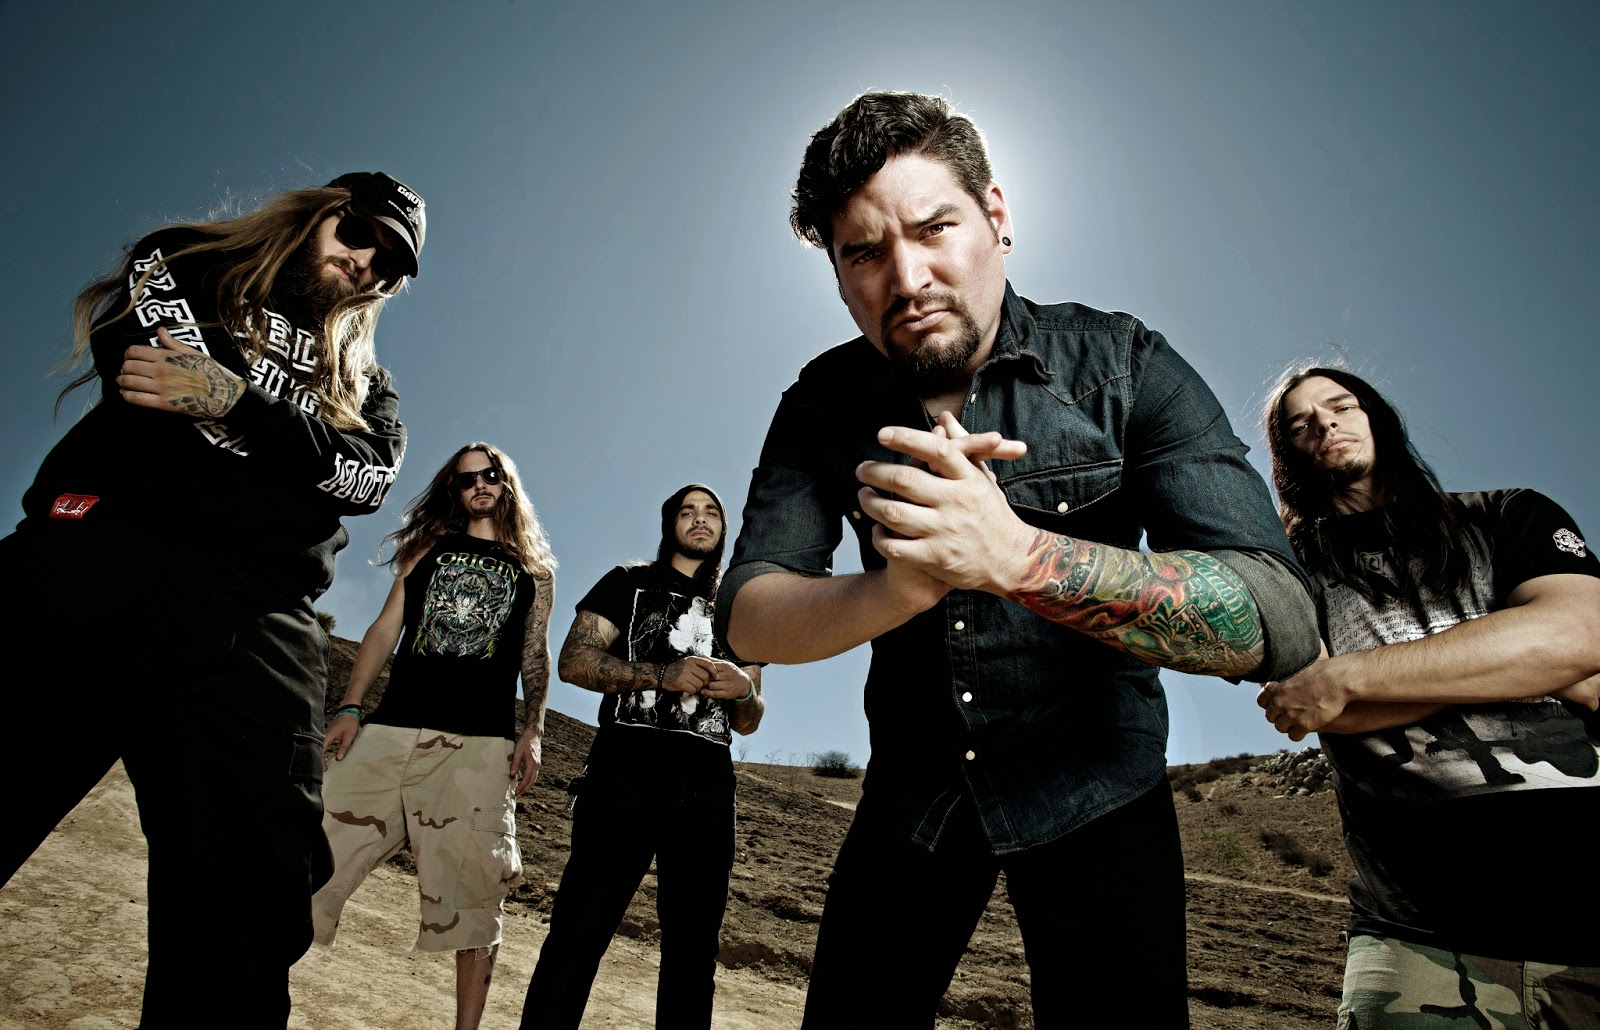 suicide silence - band